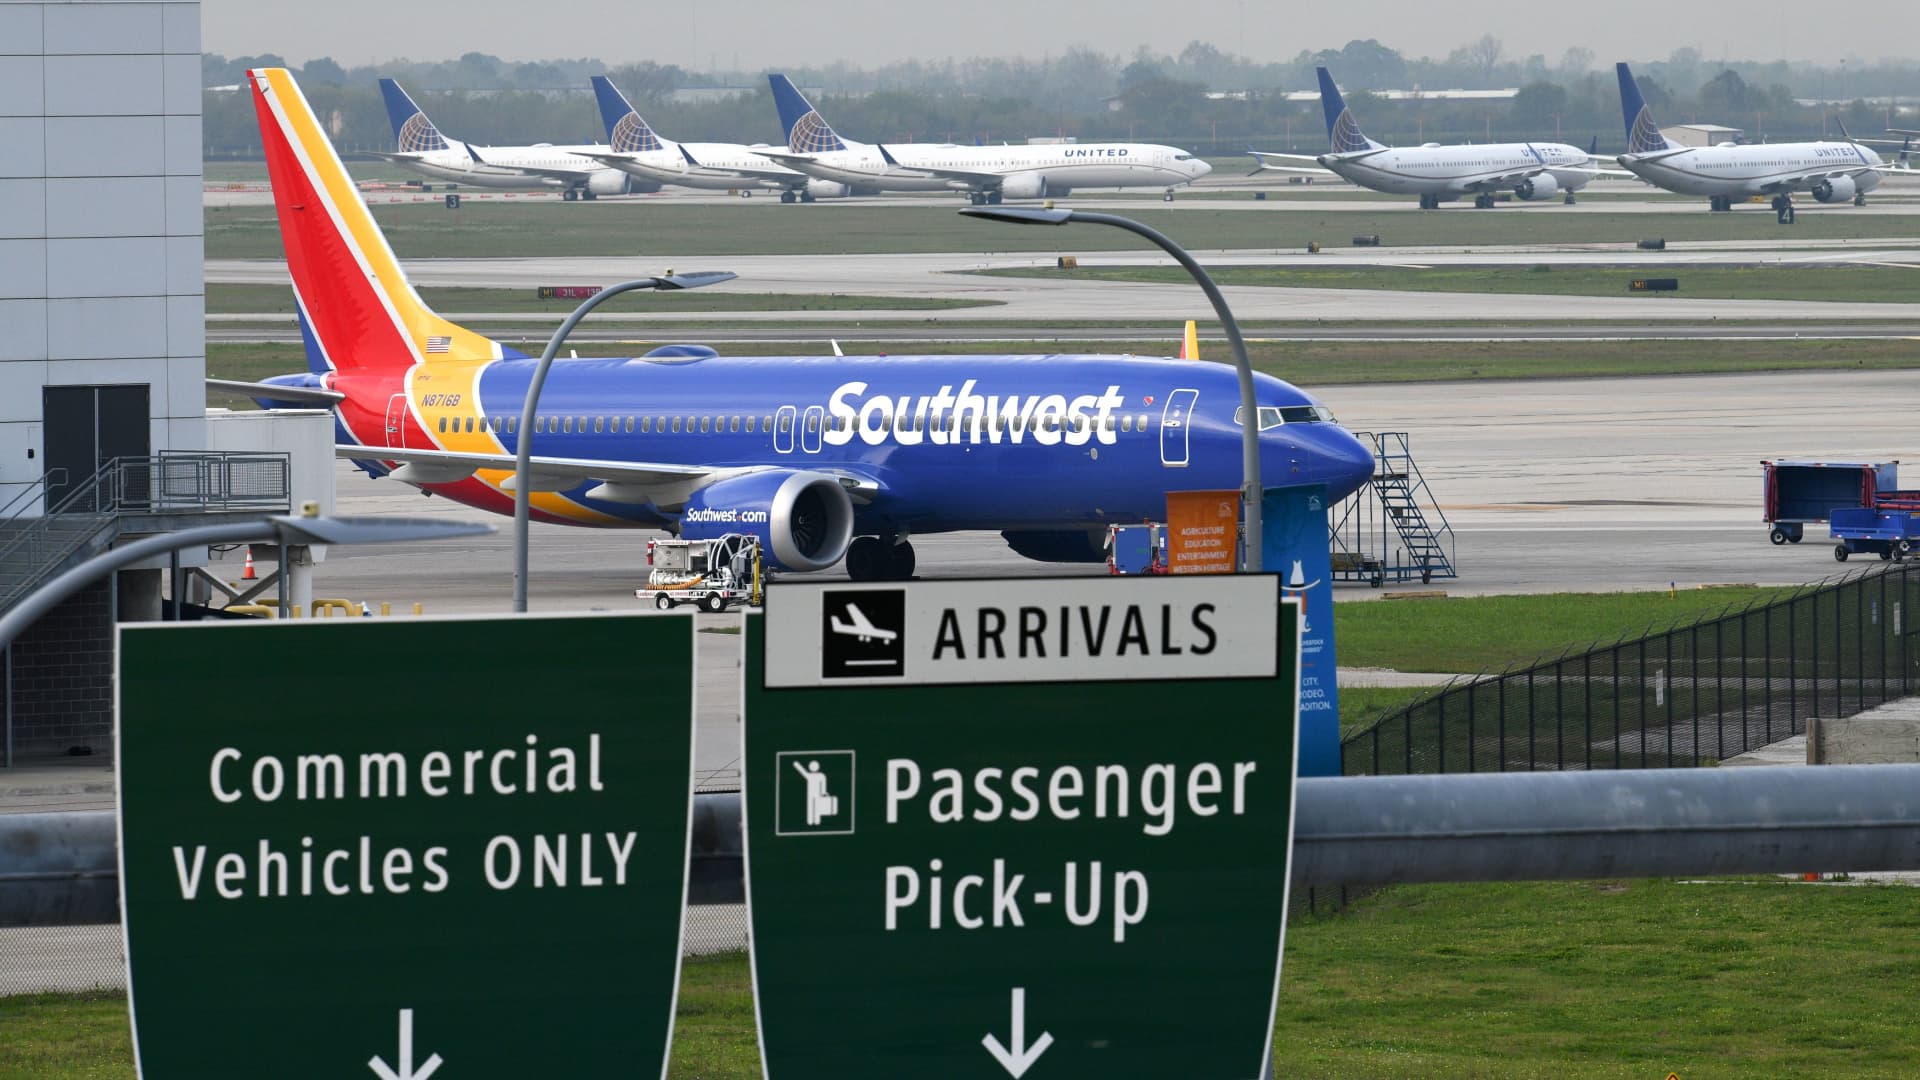 A Southwest Airlines Boeing 737 MAX 8 aircraft is pictured in front of United Airlines planes, including Boeing 737 MAX 9 models, at William P. Hobby Airport in Houston, Texas, March 18, 2019.